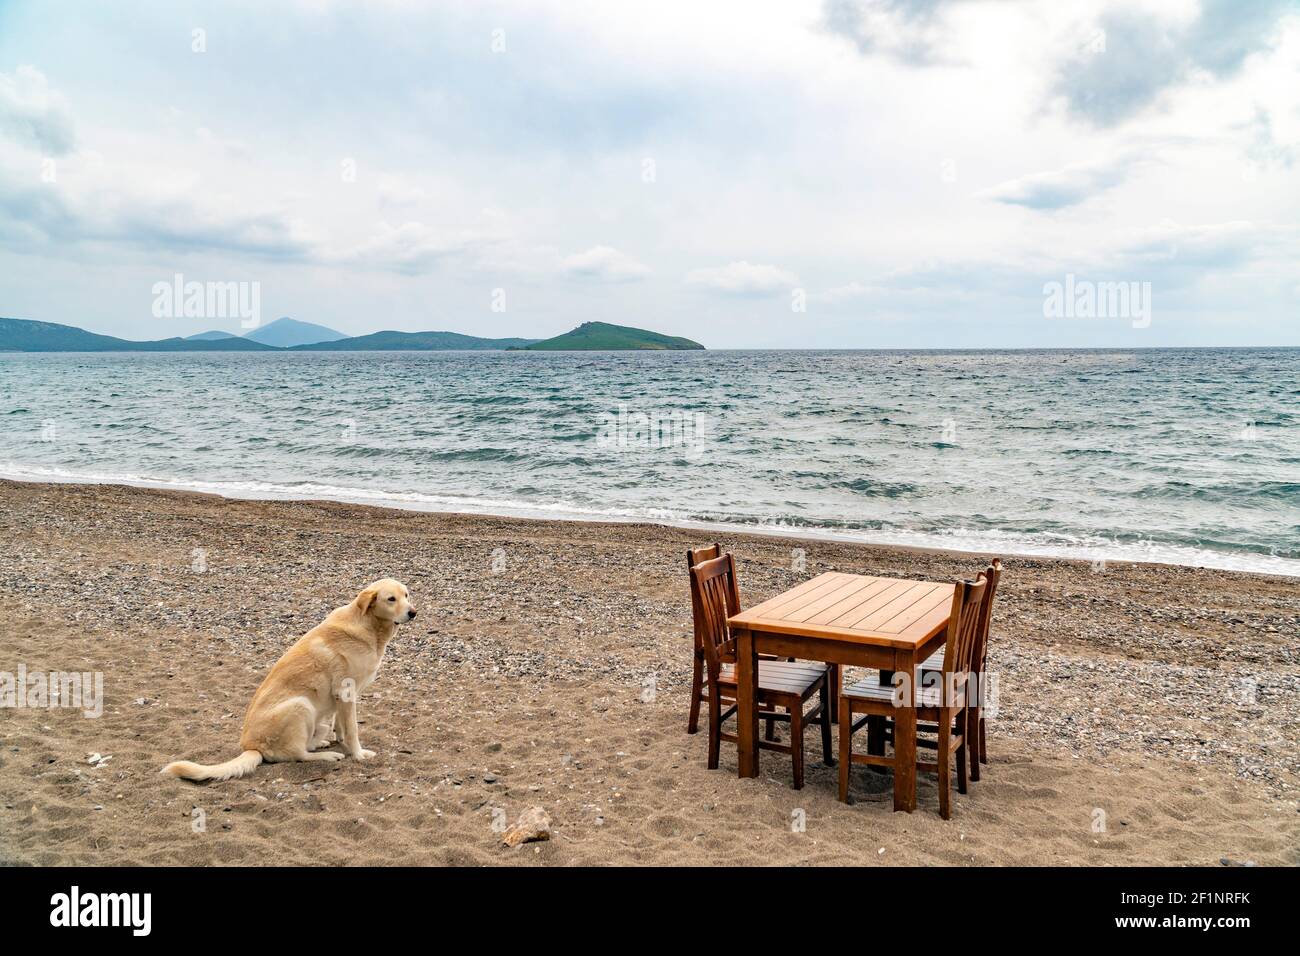 A dog sitting next to a wooden table with chairs on a pebble sandy beach bay with view to wavy sea and the horizon on a cloudy day. Stock Photo